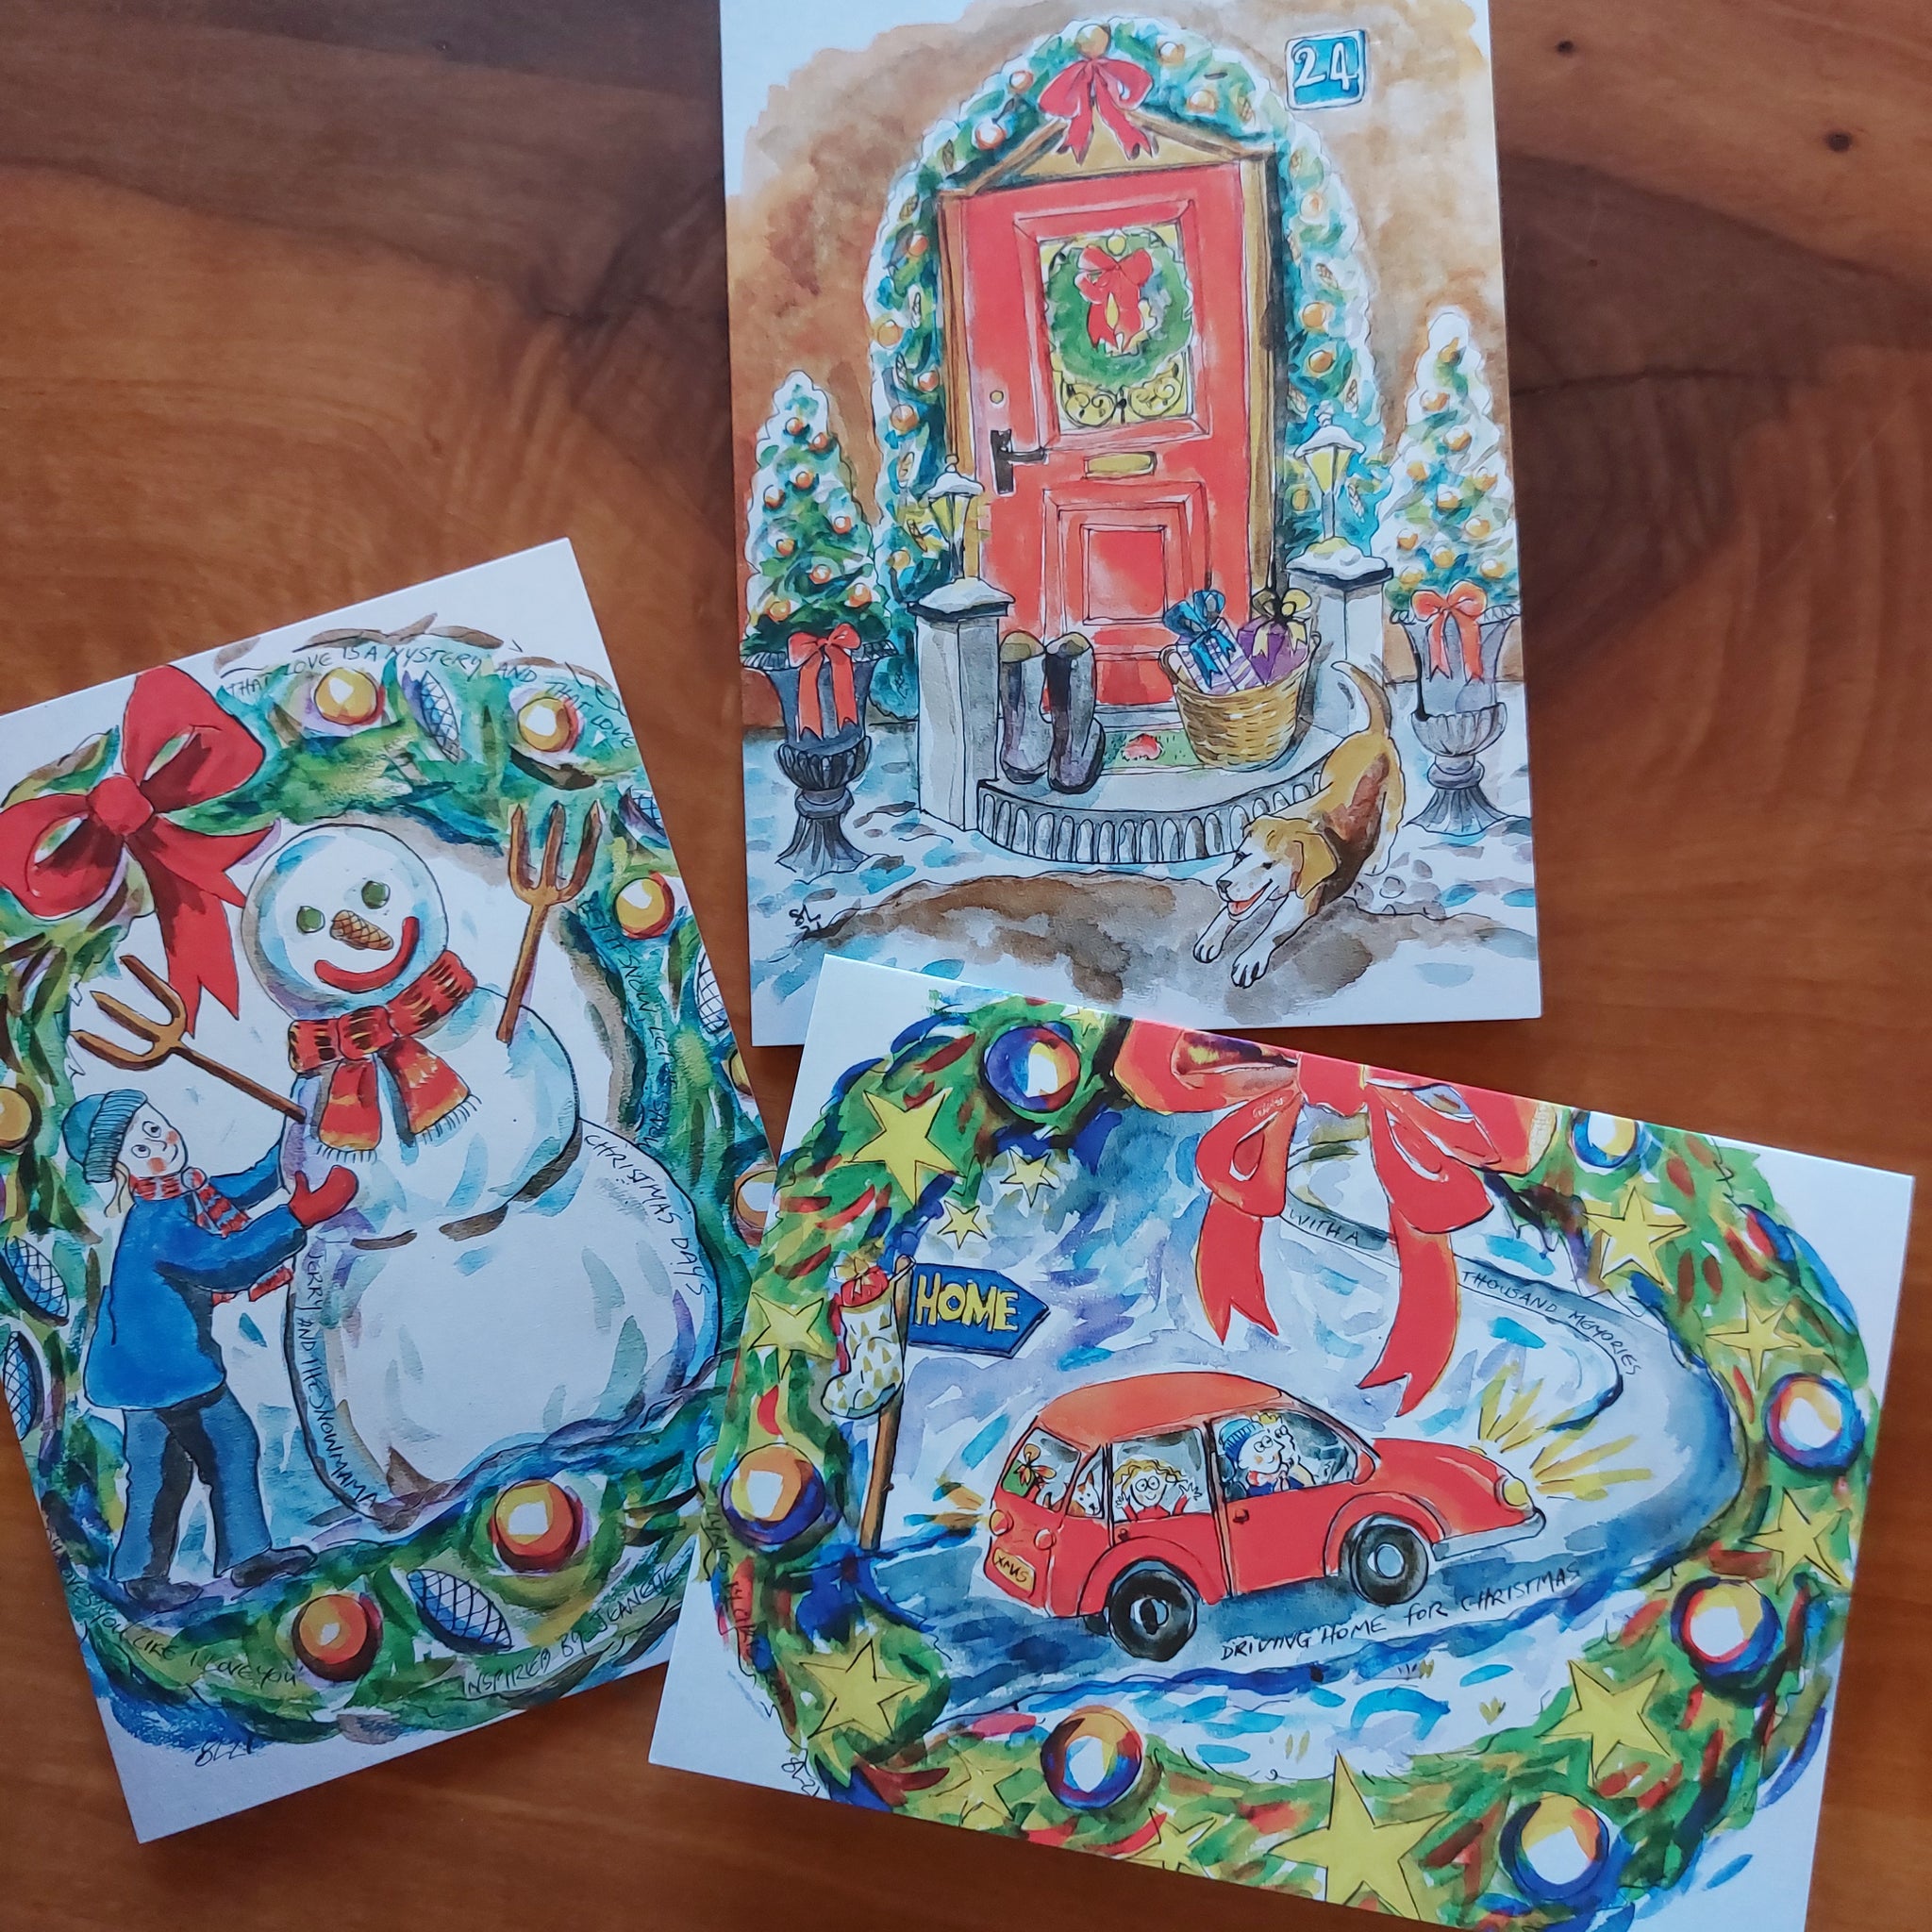 Christmas cards, set of 3: Snowman, Welcome and Home